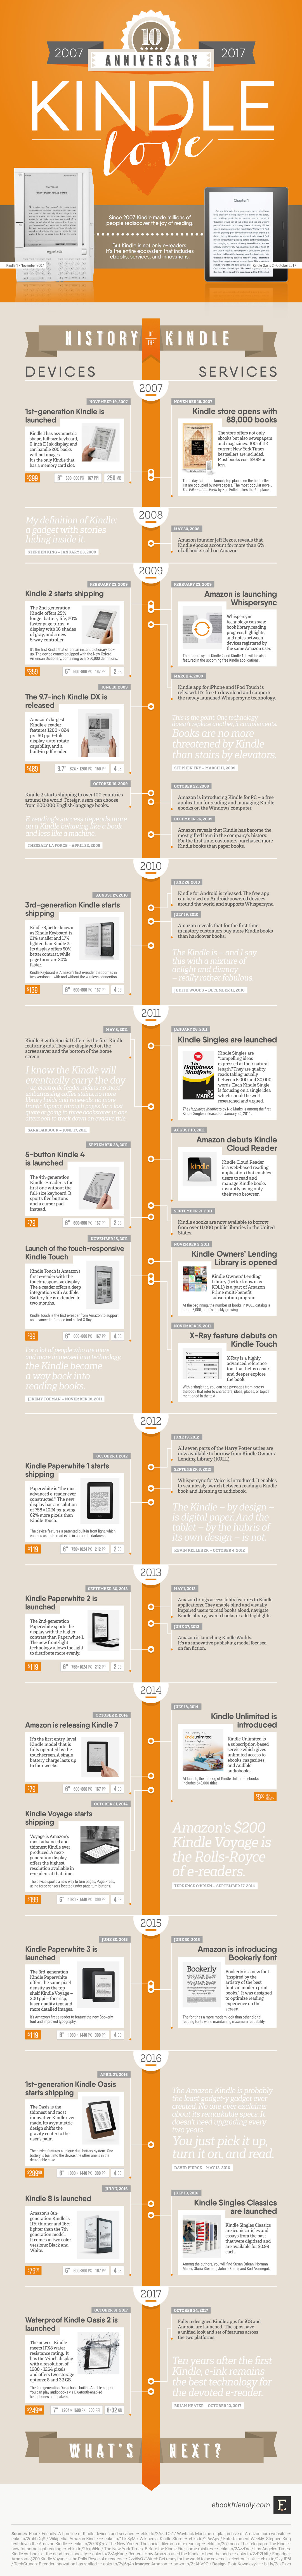 10 exciting years of the Kindle (infographic) | Ebook Friendly